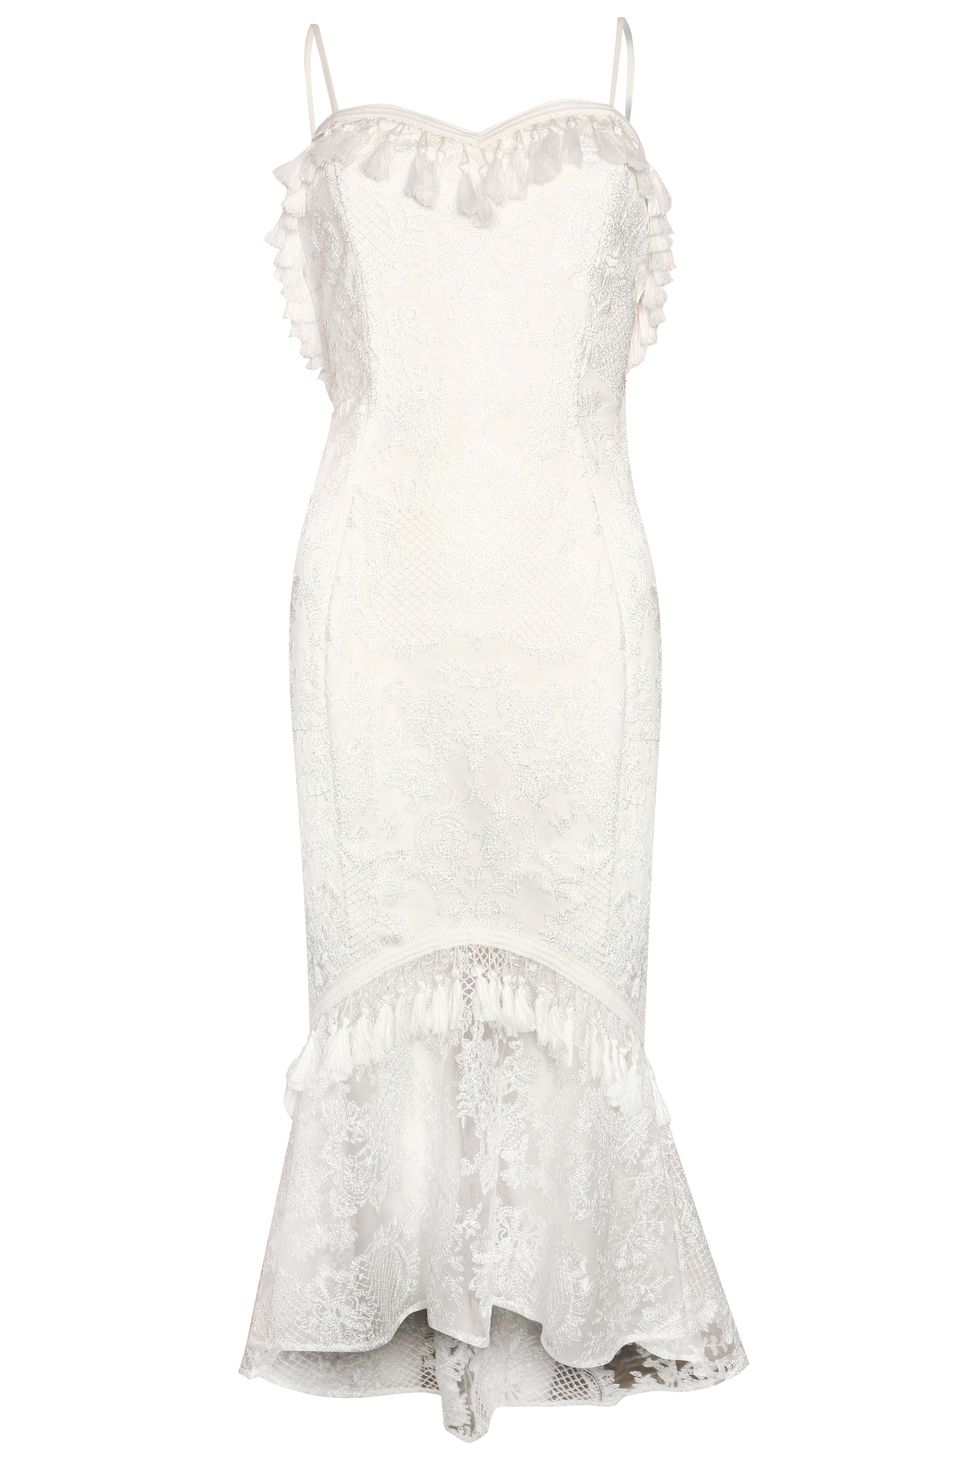 Missguided bridal